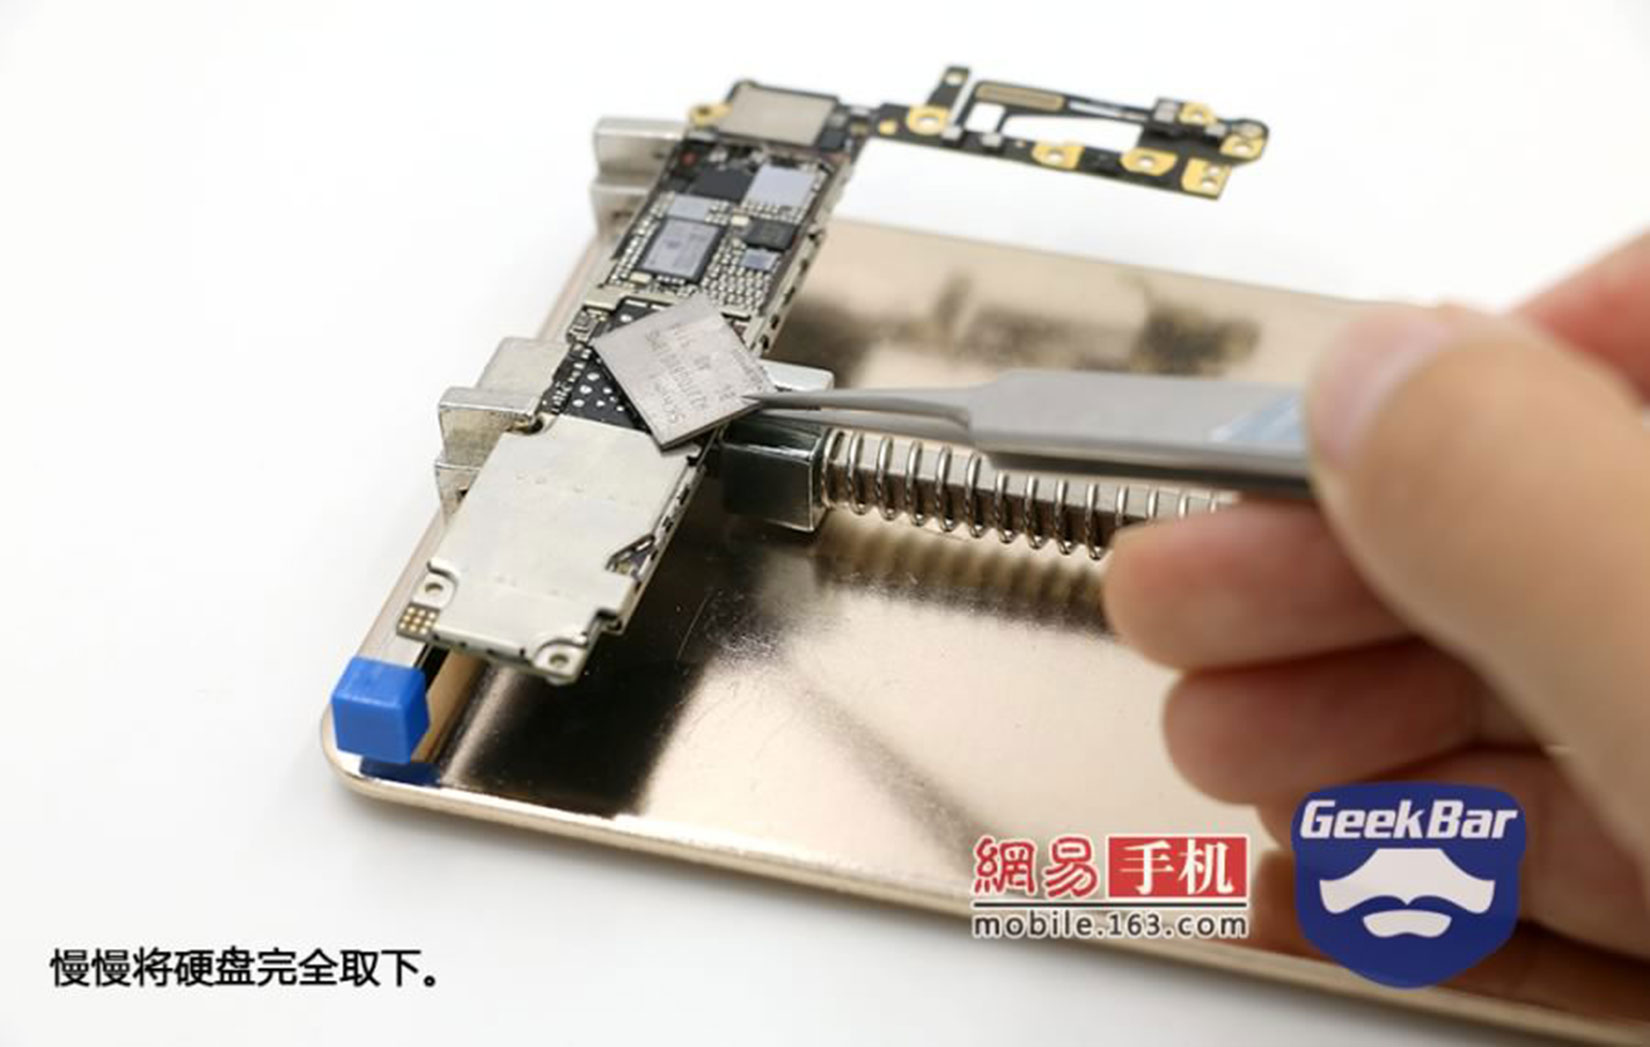 For less than R $ 350, stores in China “upgrade” iPhones from 16GB to 128GB